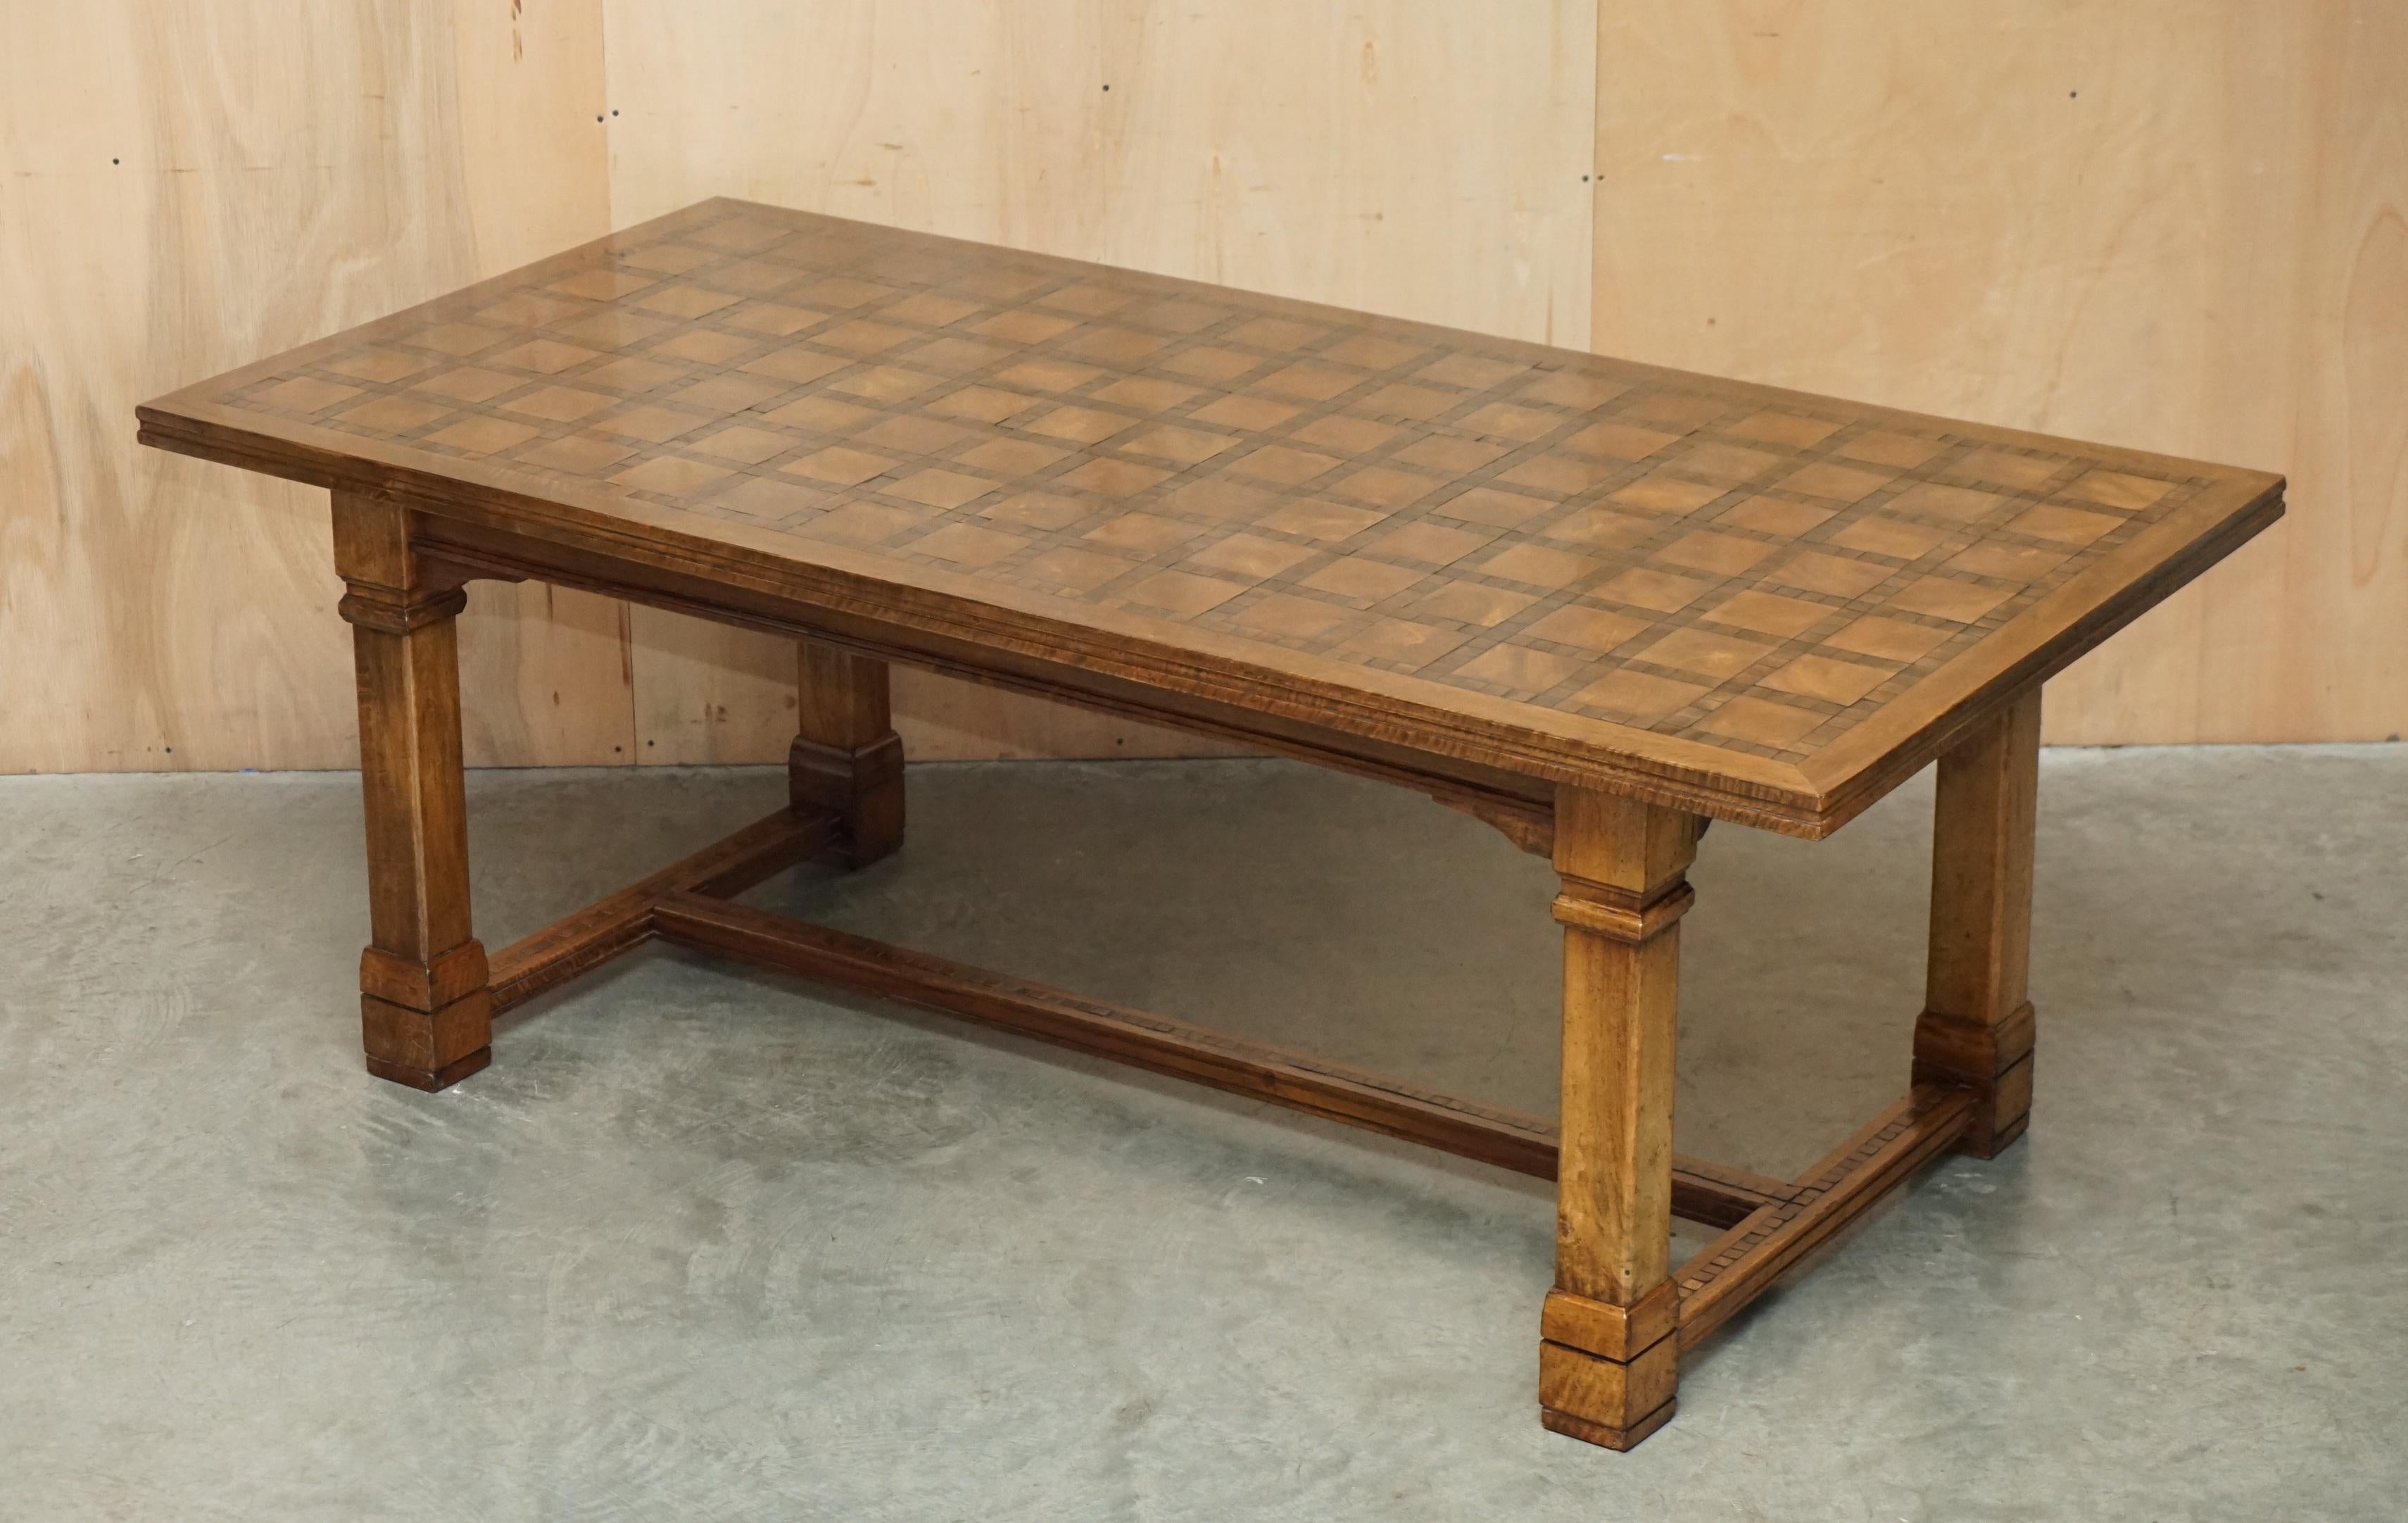 Royal House Antiques

Royal House Antiques is delighted to offer for sale this absolutely stunning, vintage Walnut Refectory dining table with sublime Oyster Veneer and Parquetry inlaid top

Please note the delivery fee listed is just a guide, it